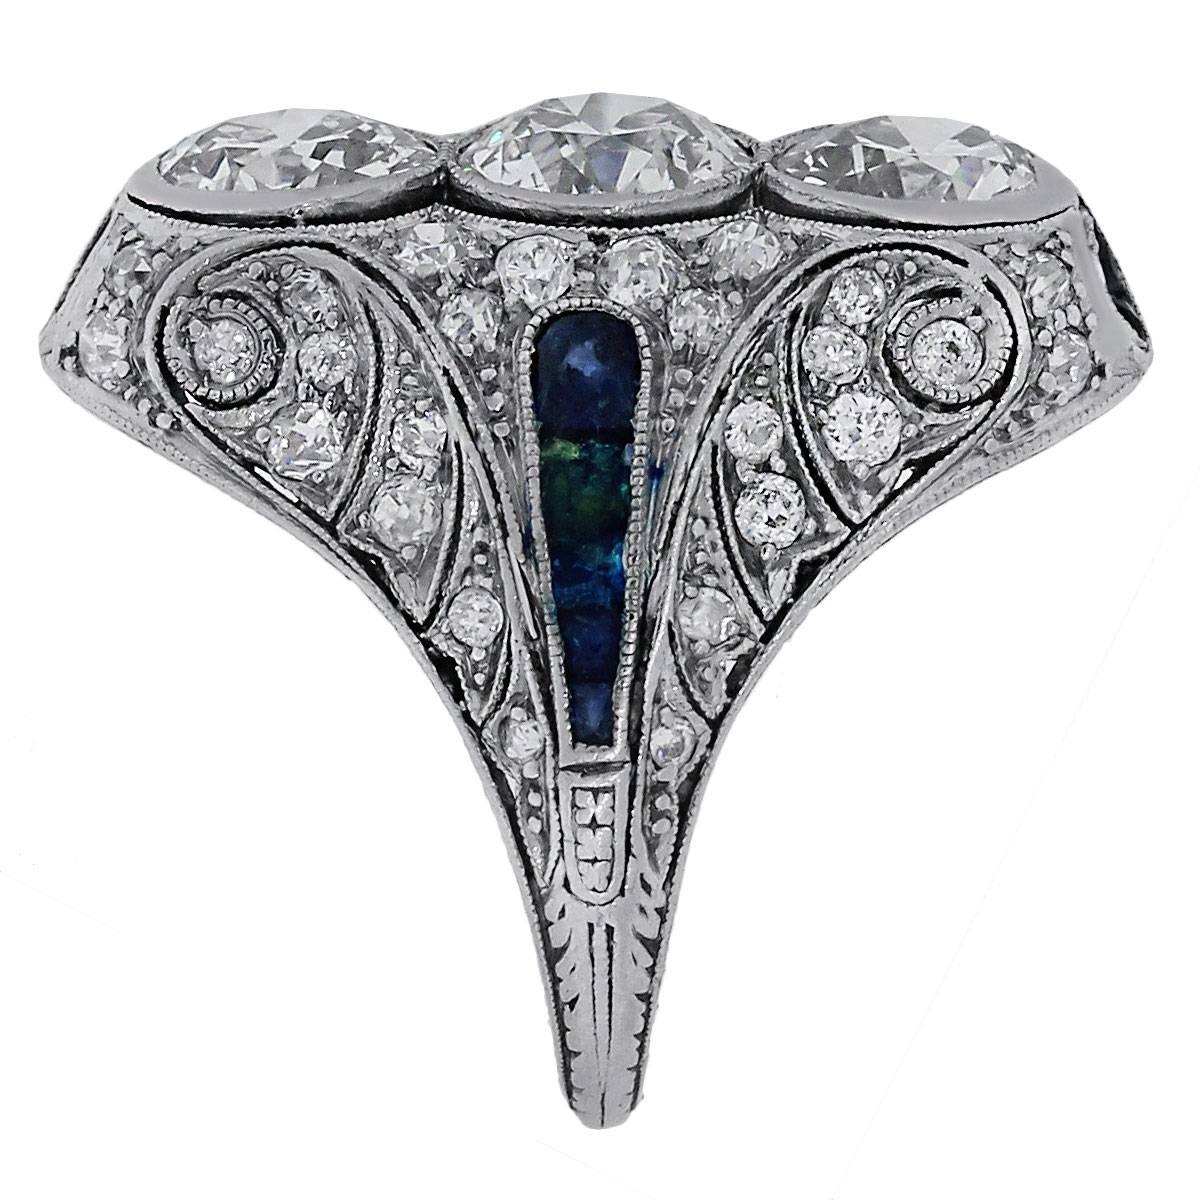 Material: Platinum
Diamond Details: Approximately 4.80ctw old European cut diamonds. Diamonds are H-I in color and VS in clarity.
Gemstone Details: Blue sapphires approximately 3mm in diameter
Ring Size	7.5 (can be sized)
Ring Measurements: 1.20